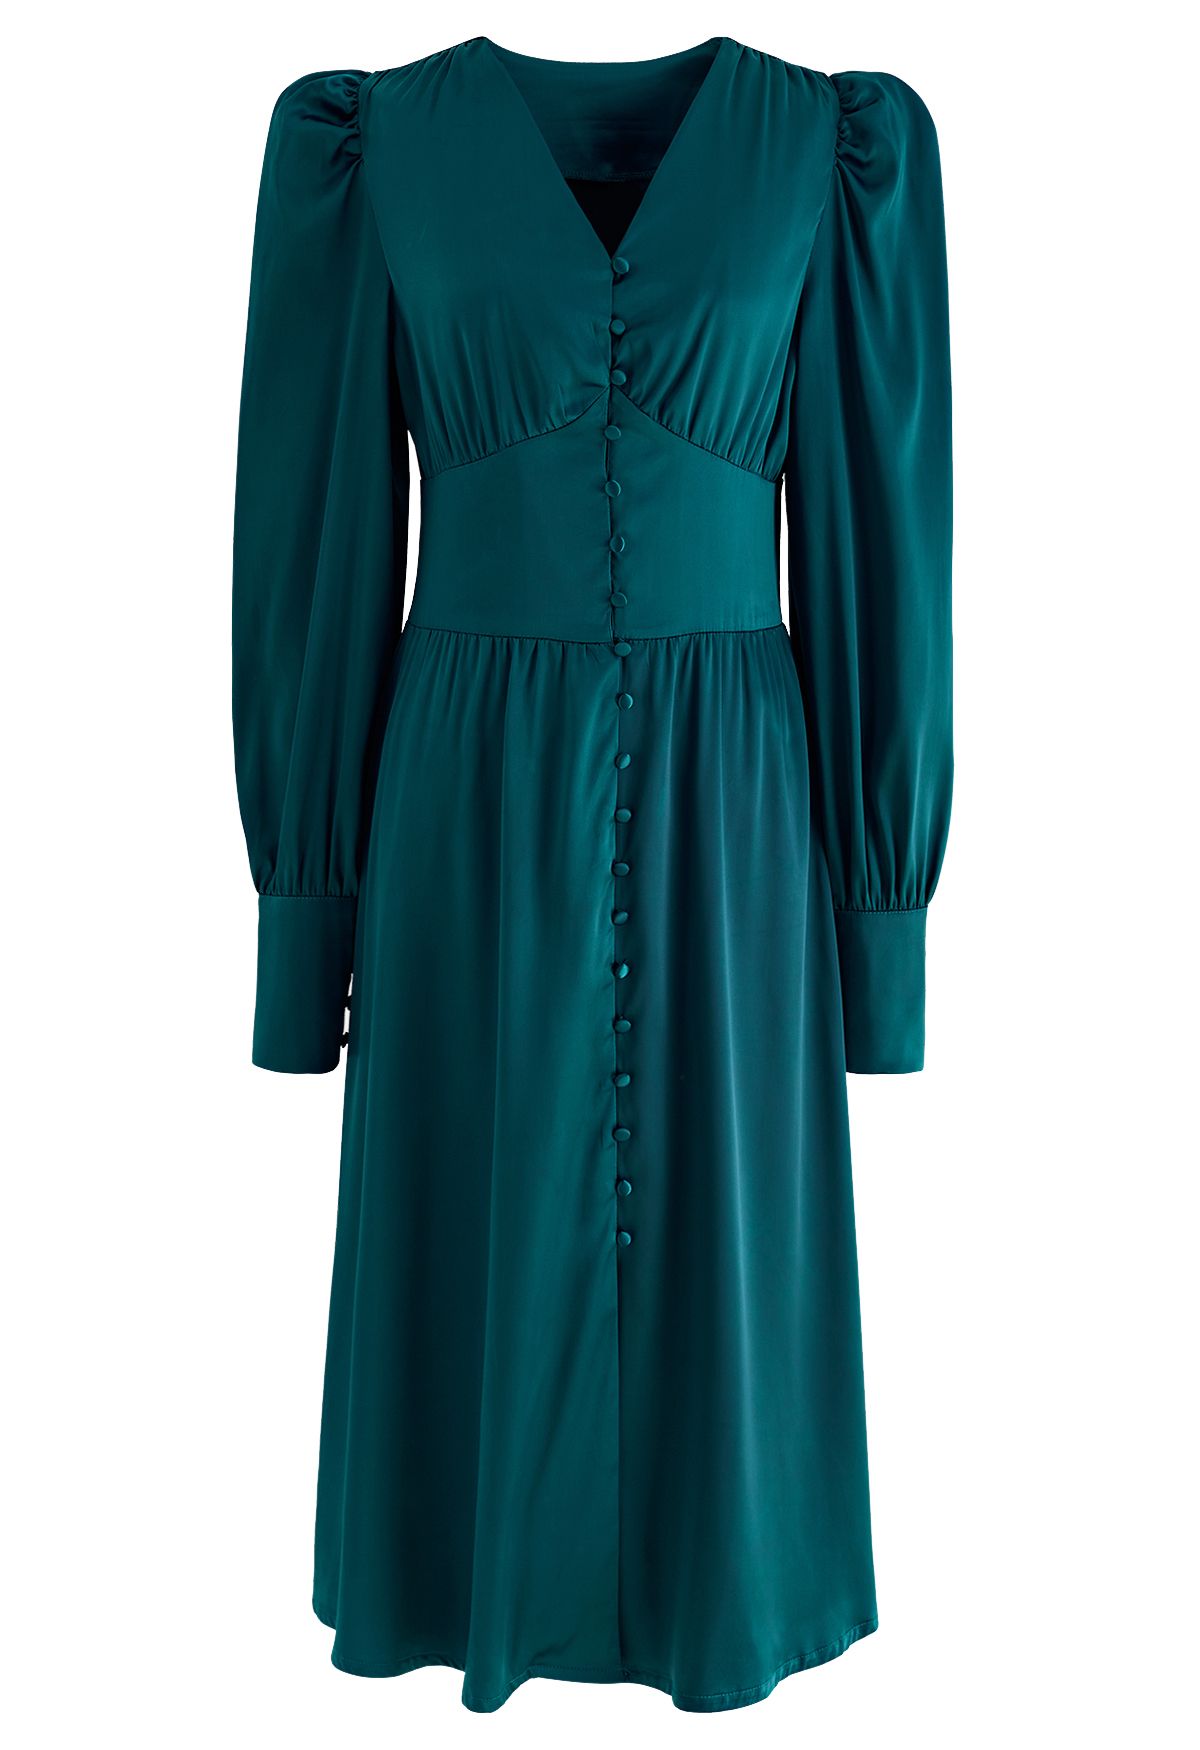 Puff Sleeves Button Up Satin Midi Dress in Emerald